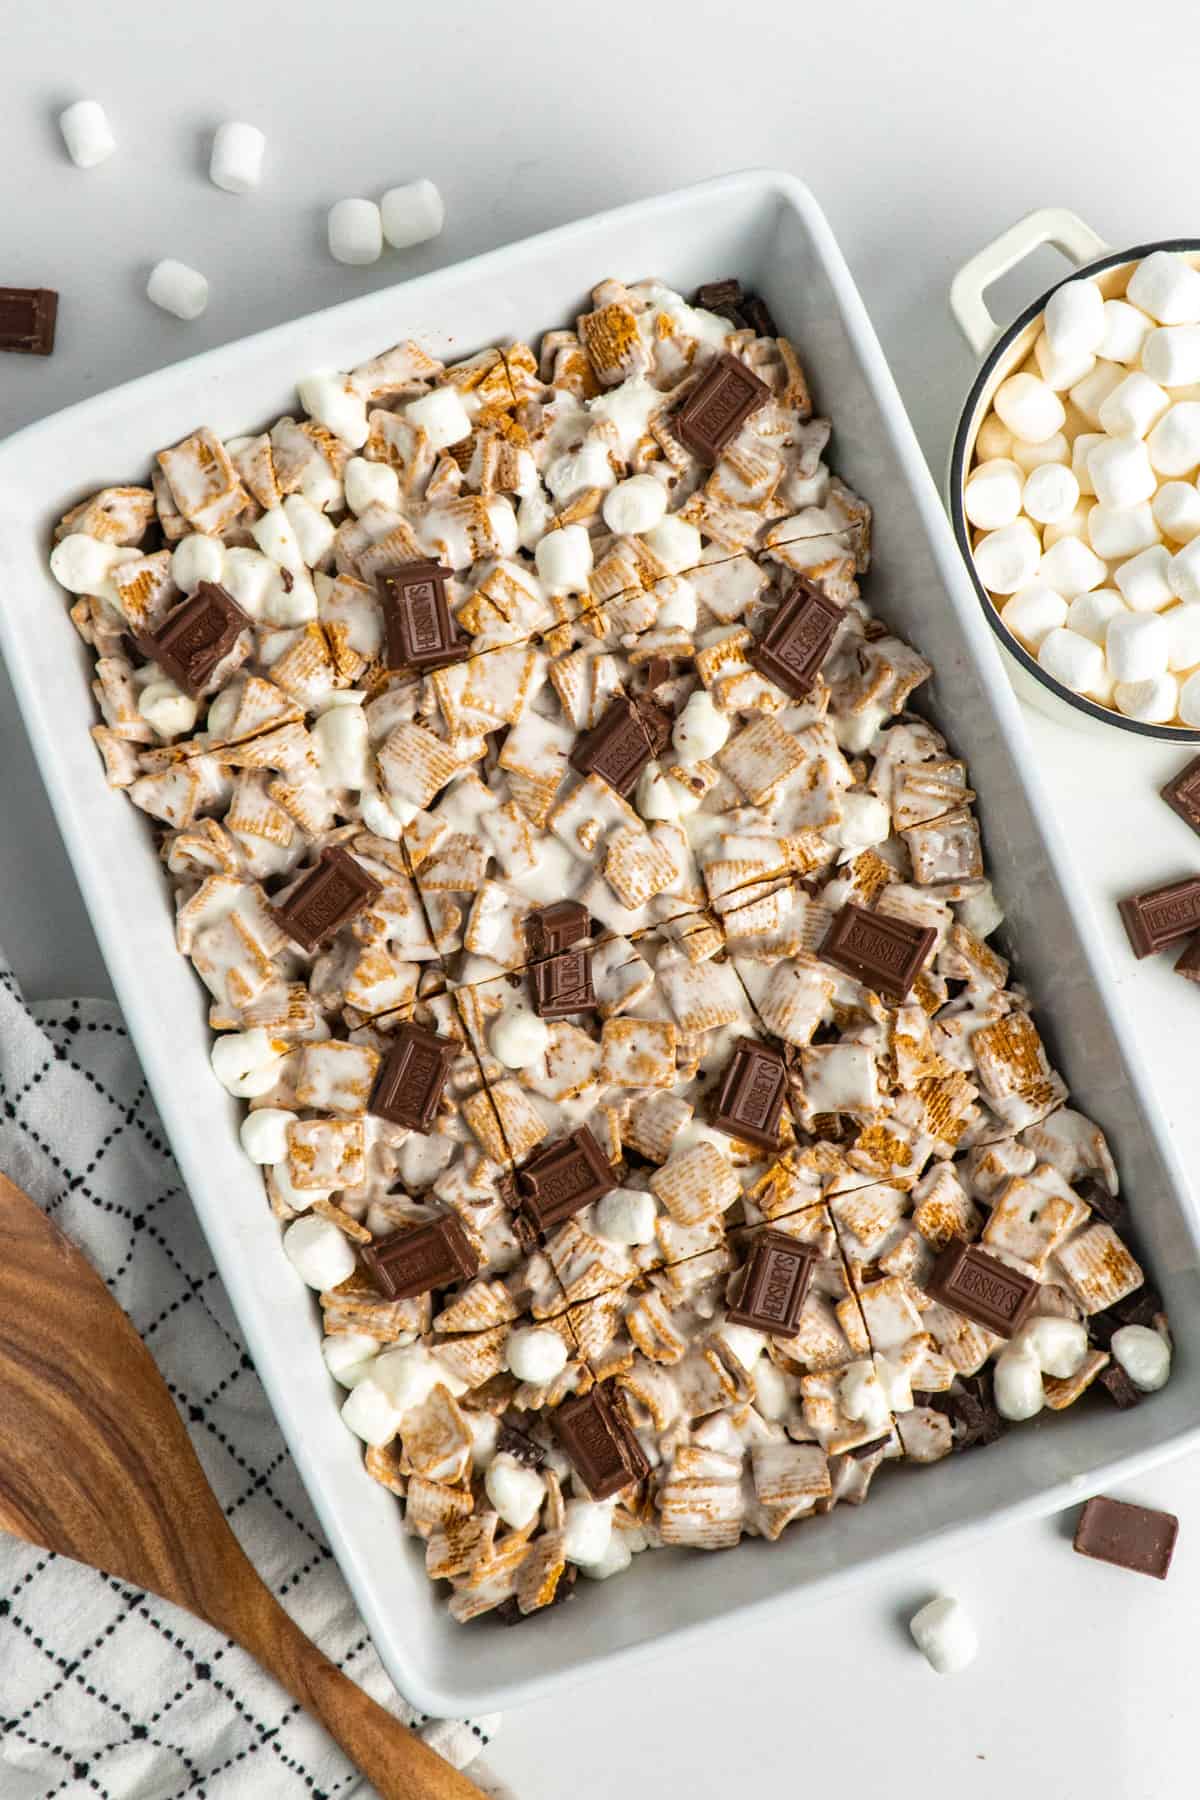 Golden Graham s'mores bars in a white baking dish!